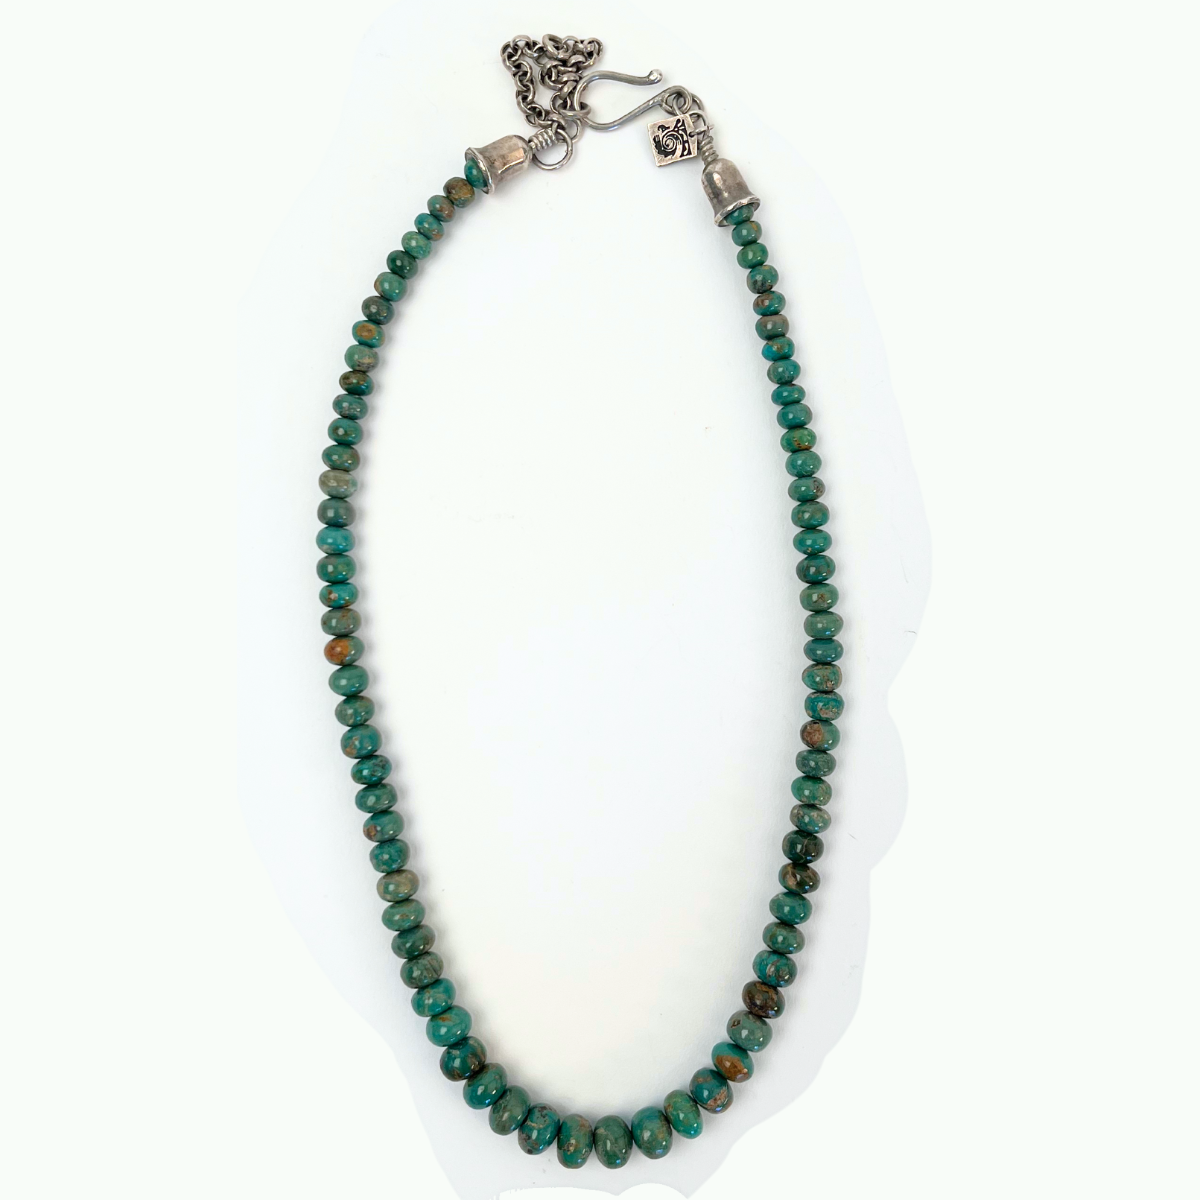 Emerald Valley Green Rondels Necklace